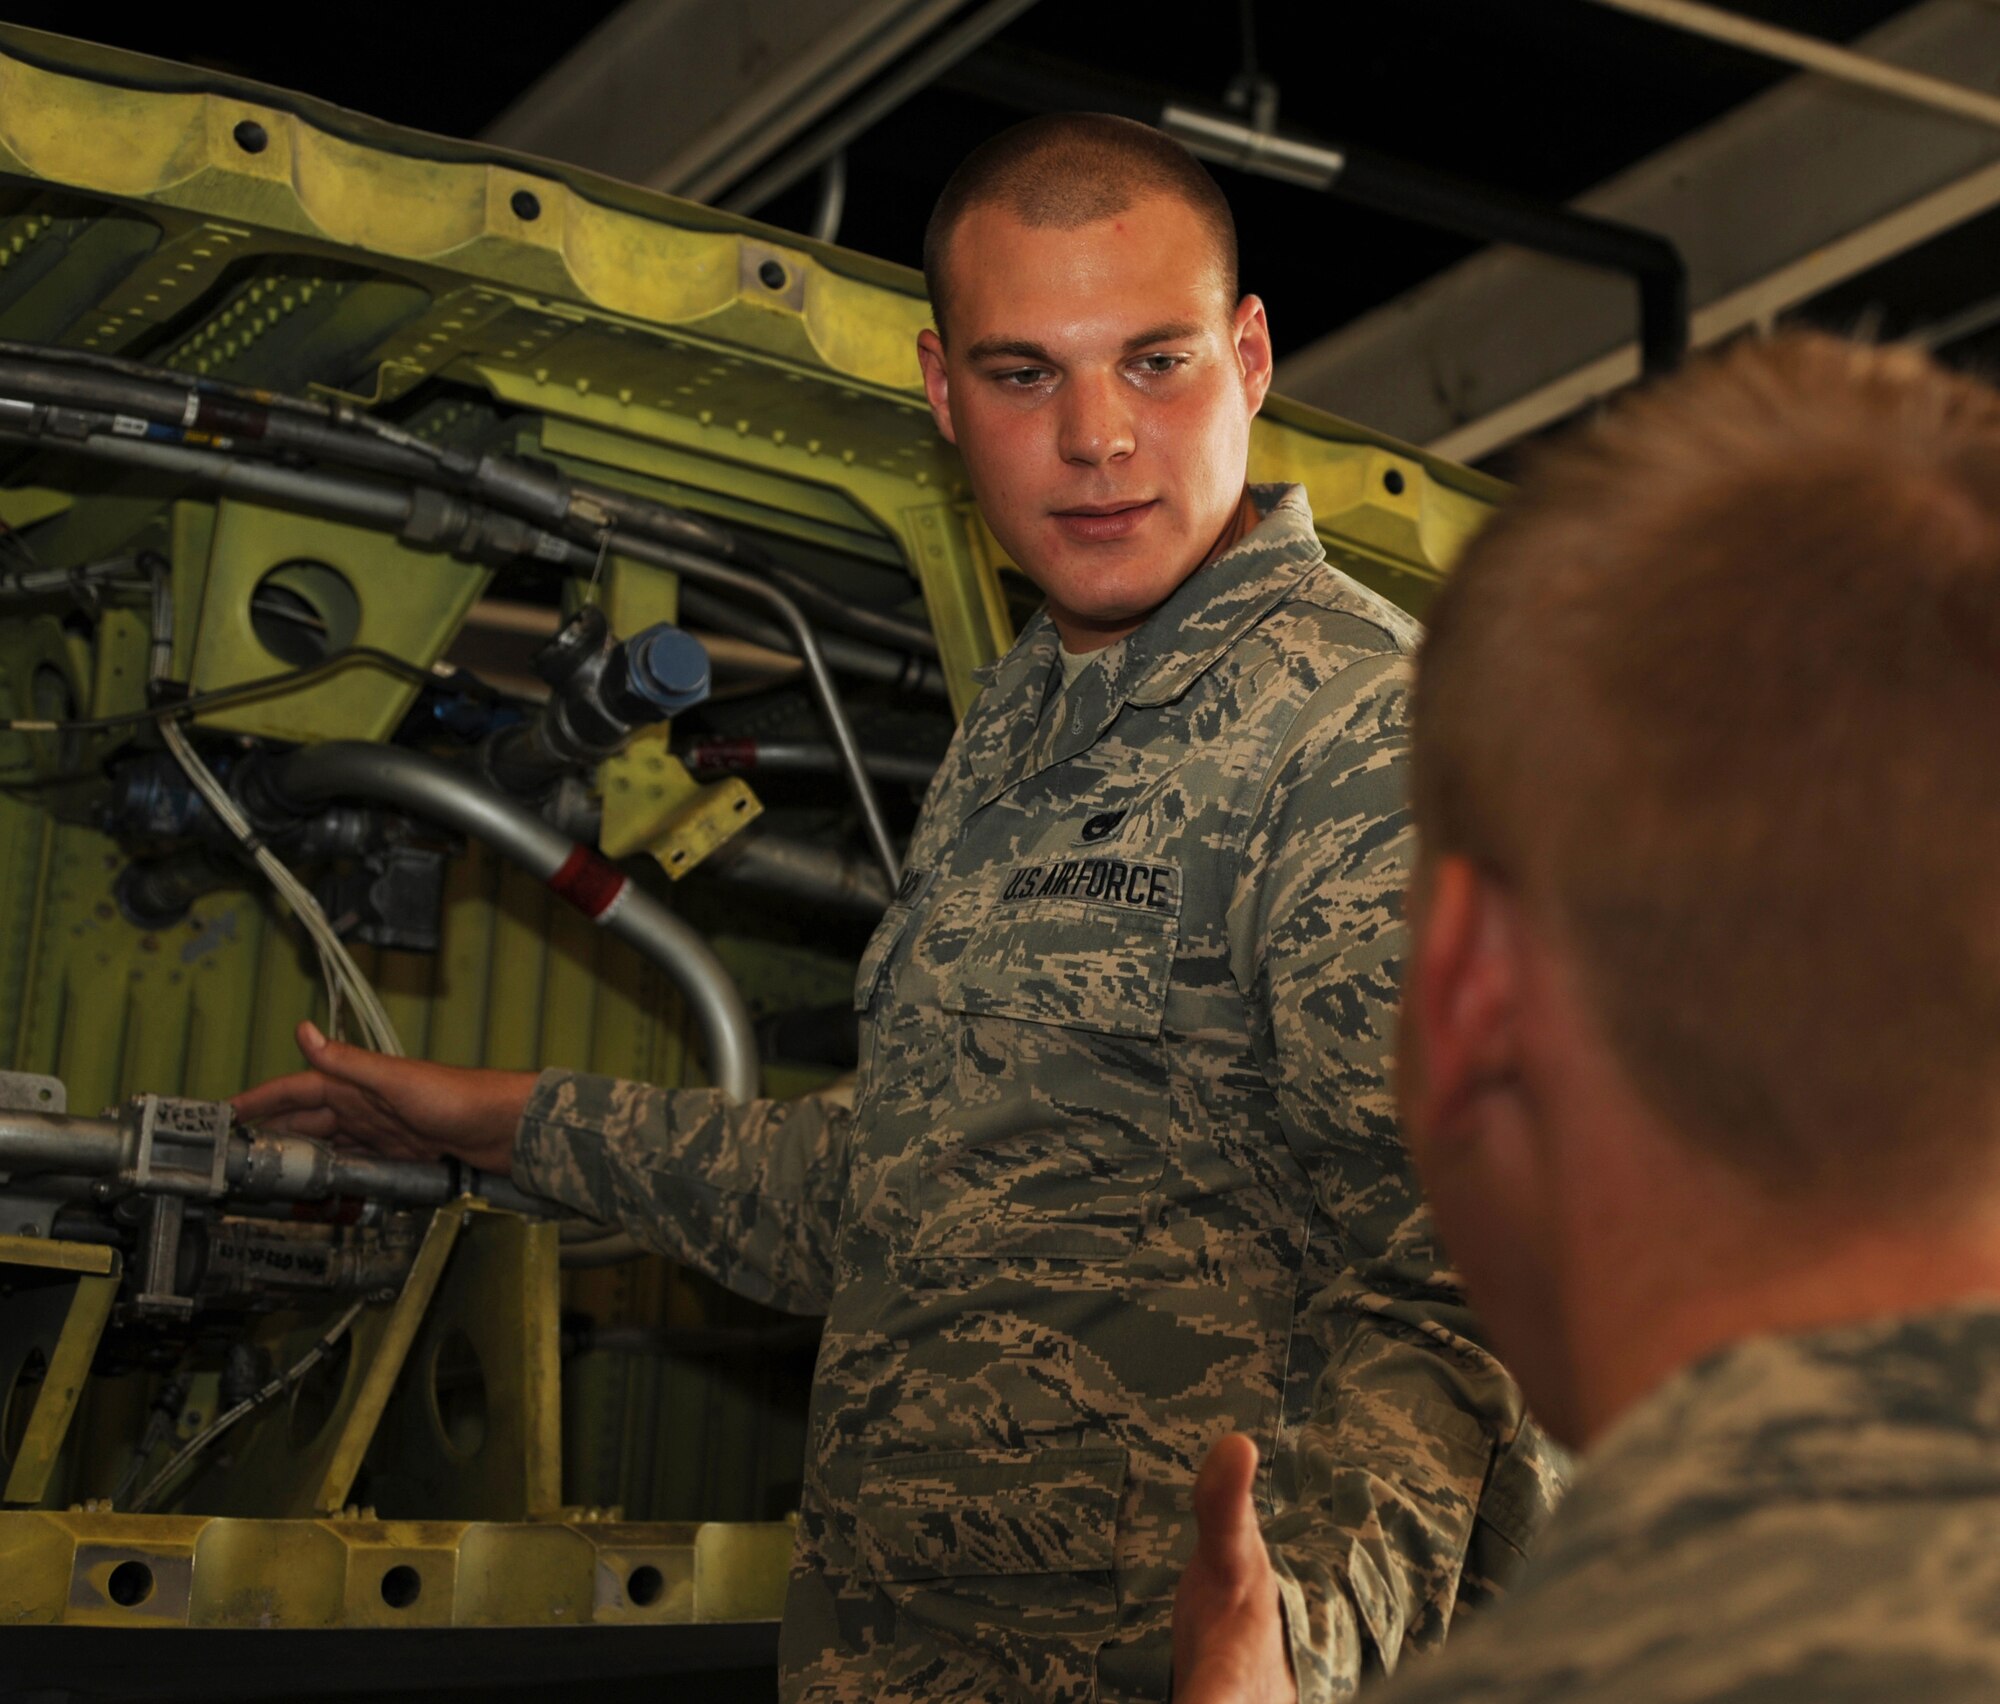 Airman 1st Class Joshua Dedenbach, a 19th Component Maintenance Squadron aircraft fuel systems apprentice, trains a 19th CMS field systems apprentice on the correct way to install and remove parts on a No. 3 dry bay from the wing of an aircraft July 22, 2013, at Little Rock Air Force Base, Ark. Dedenbach was a vital team member in the repair of an elusive C-130 single point refuel drain pump malfunction. The repairs he completed returned a 48 million dollar aircraft to full mission capability two hours ahead of schedule. (U.S. Air Force photo by Airman 1st Class Harry Brexel)